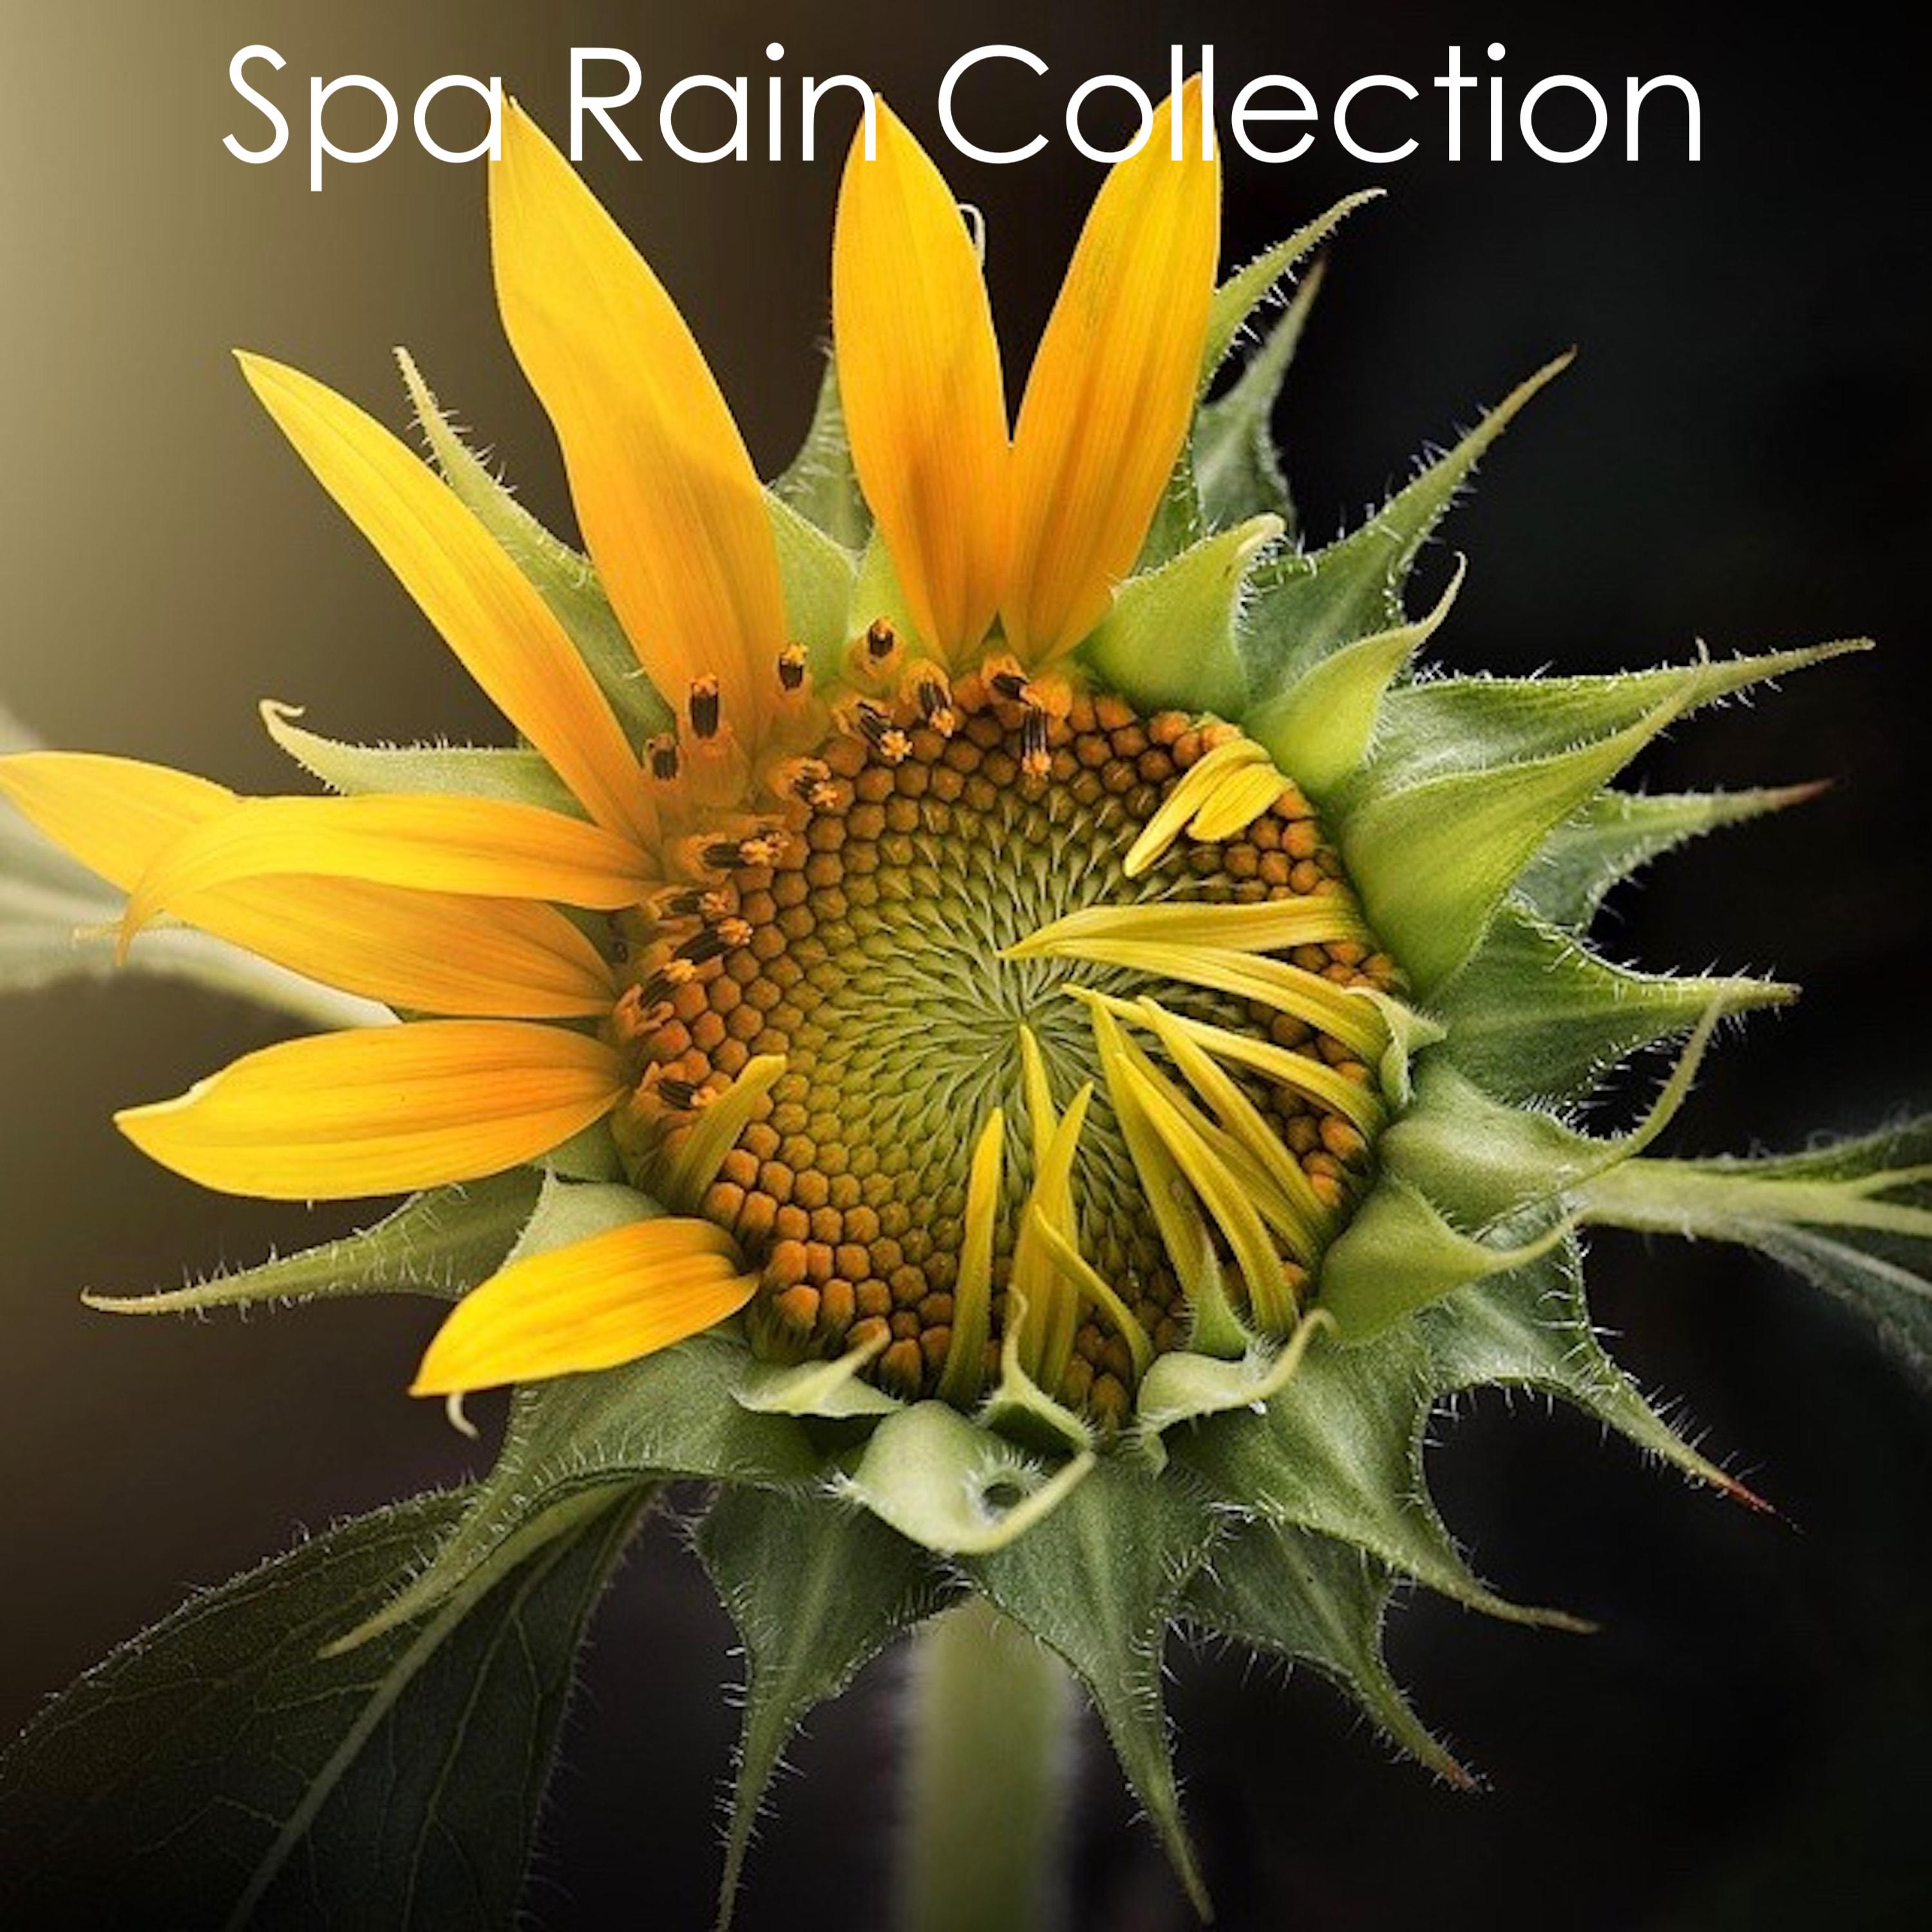 #2018 Spa Collection: The Best Nature Sounds for Spa, Meditation, Zen, Massage, Yoga and Herbal Therapies